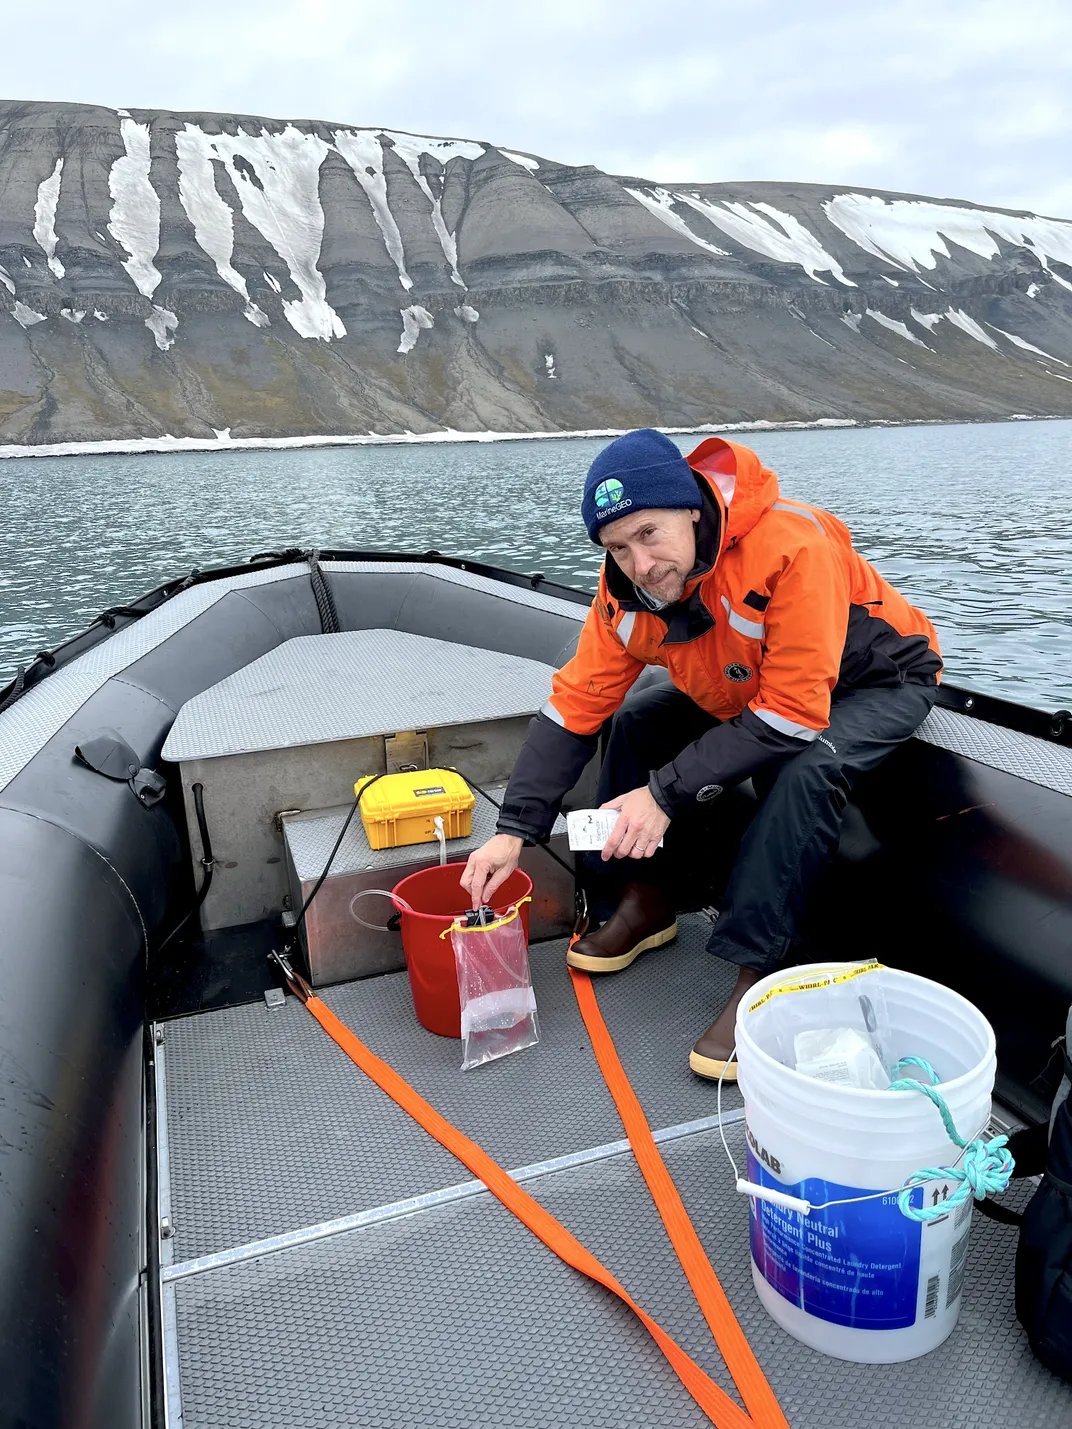 Man in orange jacket testing water sample in lifeboat, water around boat, snowy mountains in background